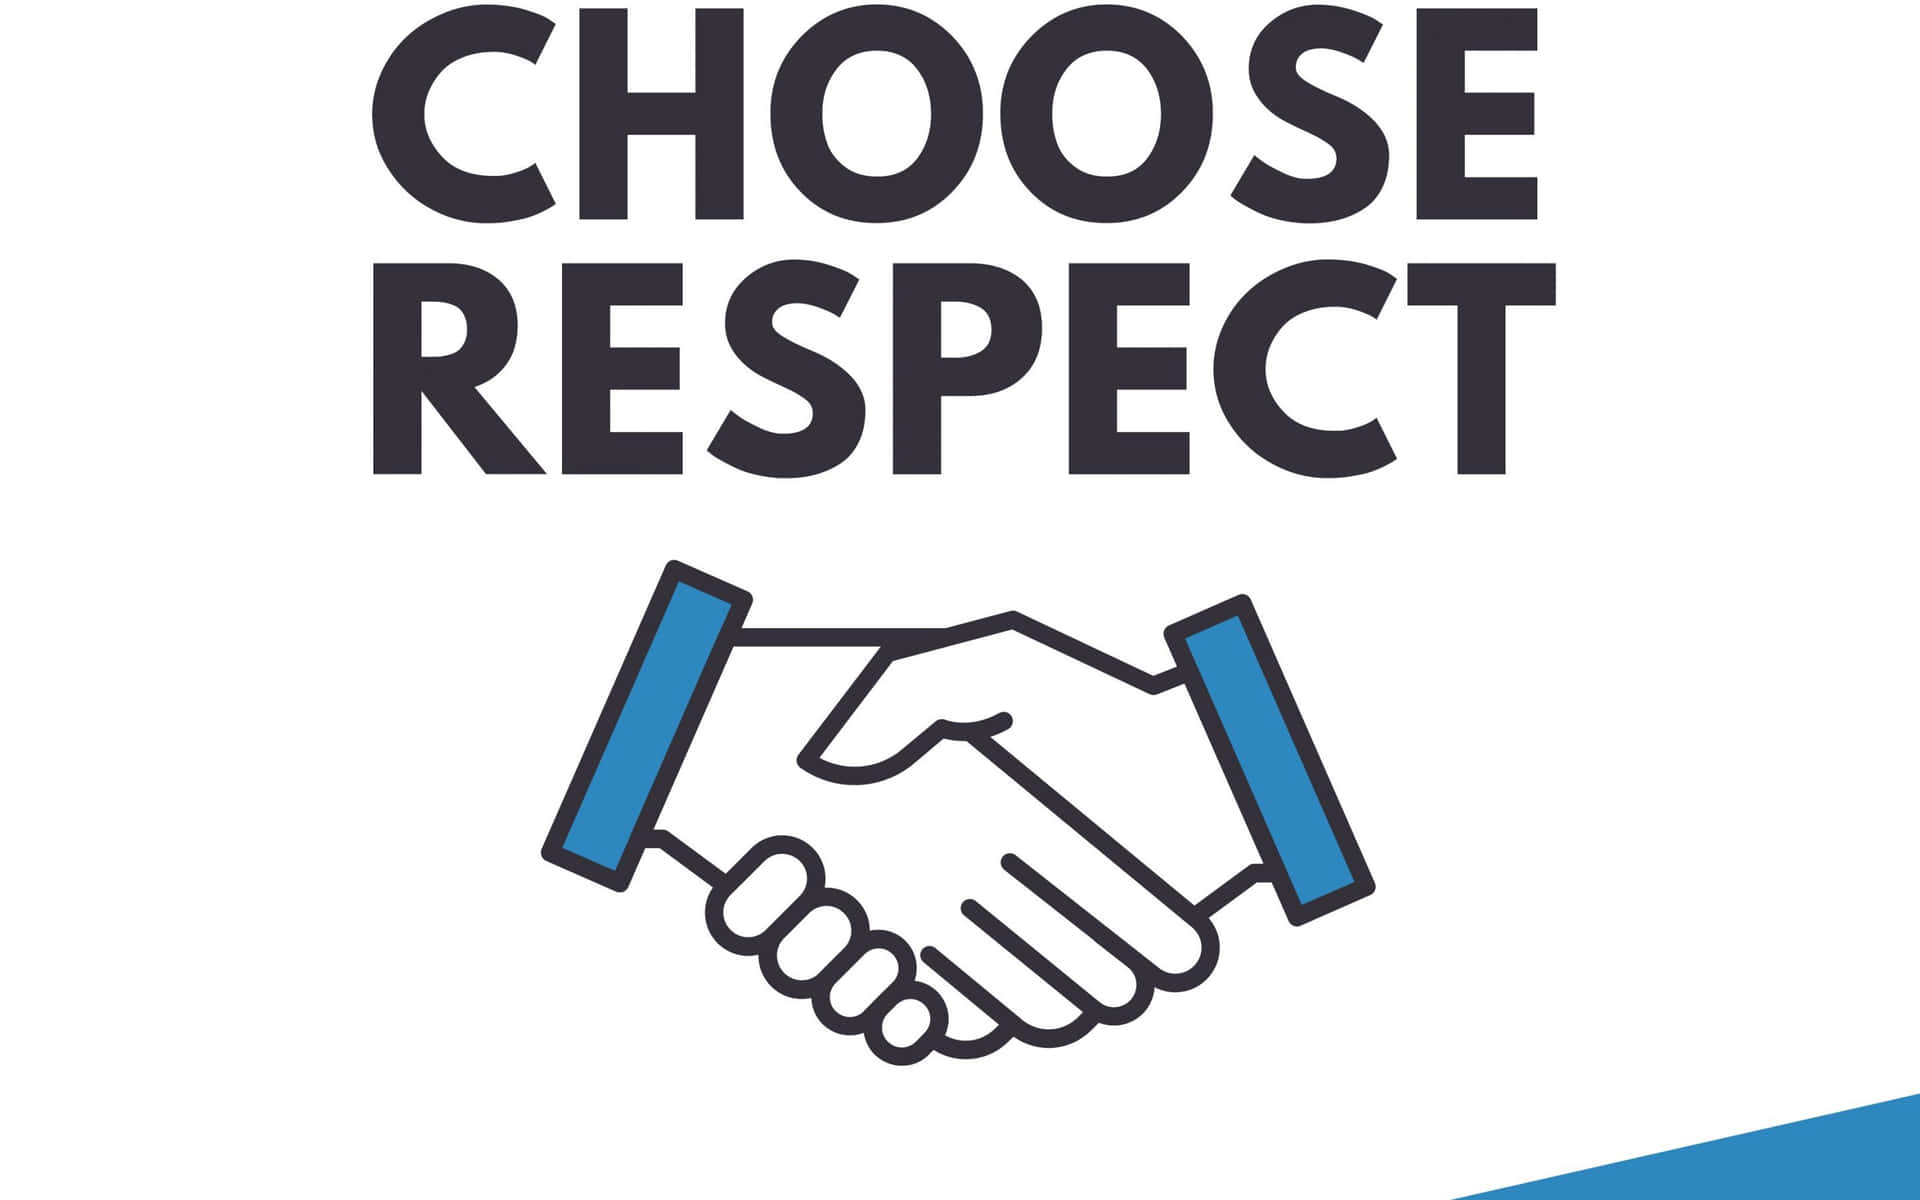 choose respect logo with two hands shaking